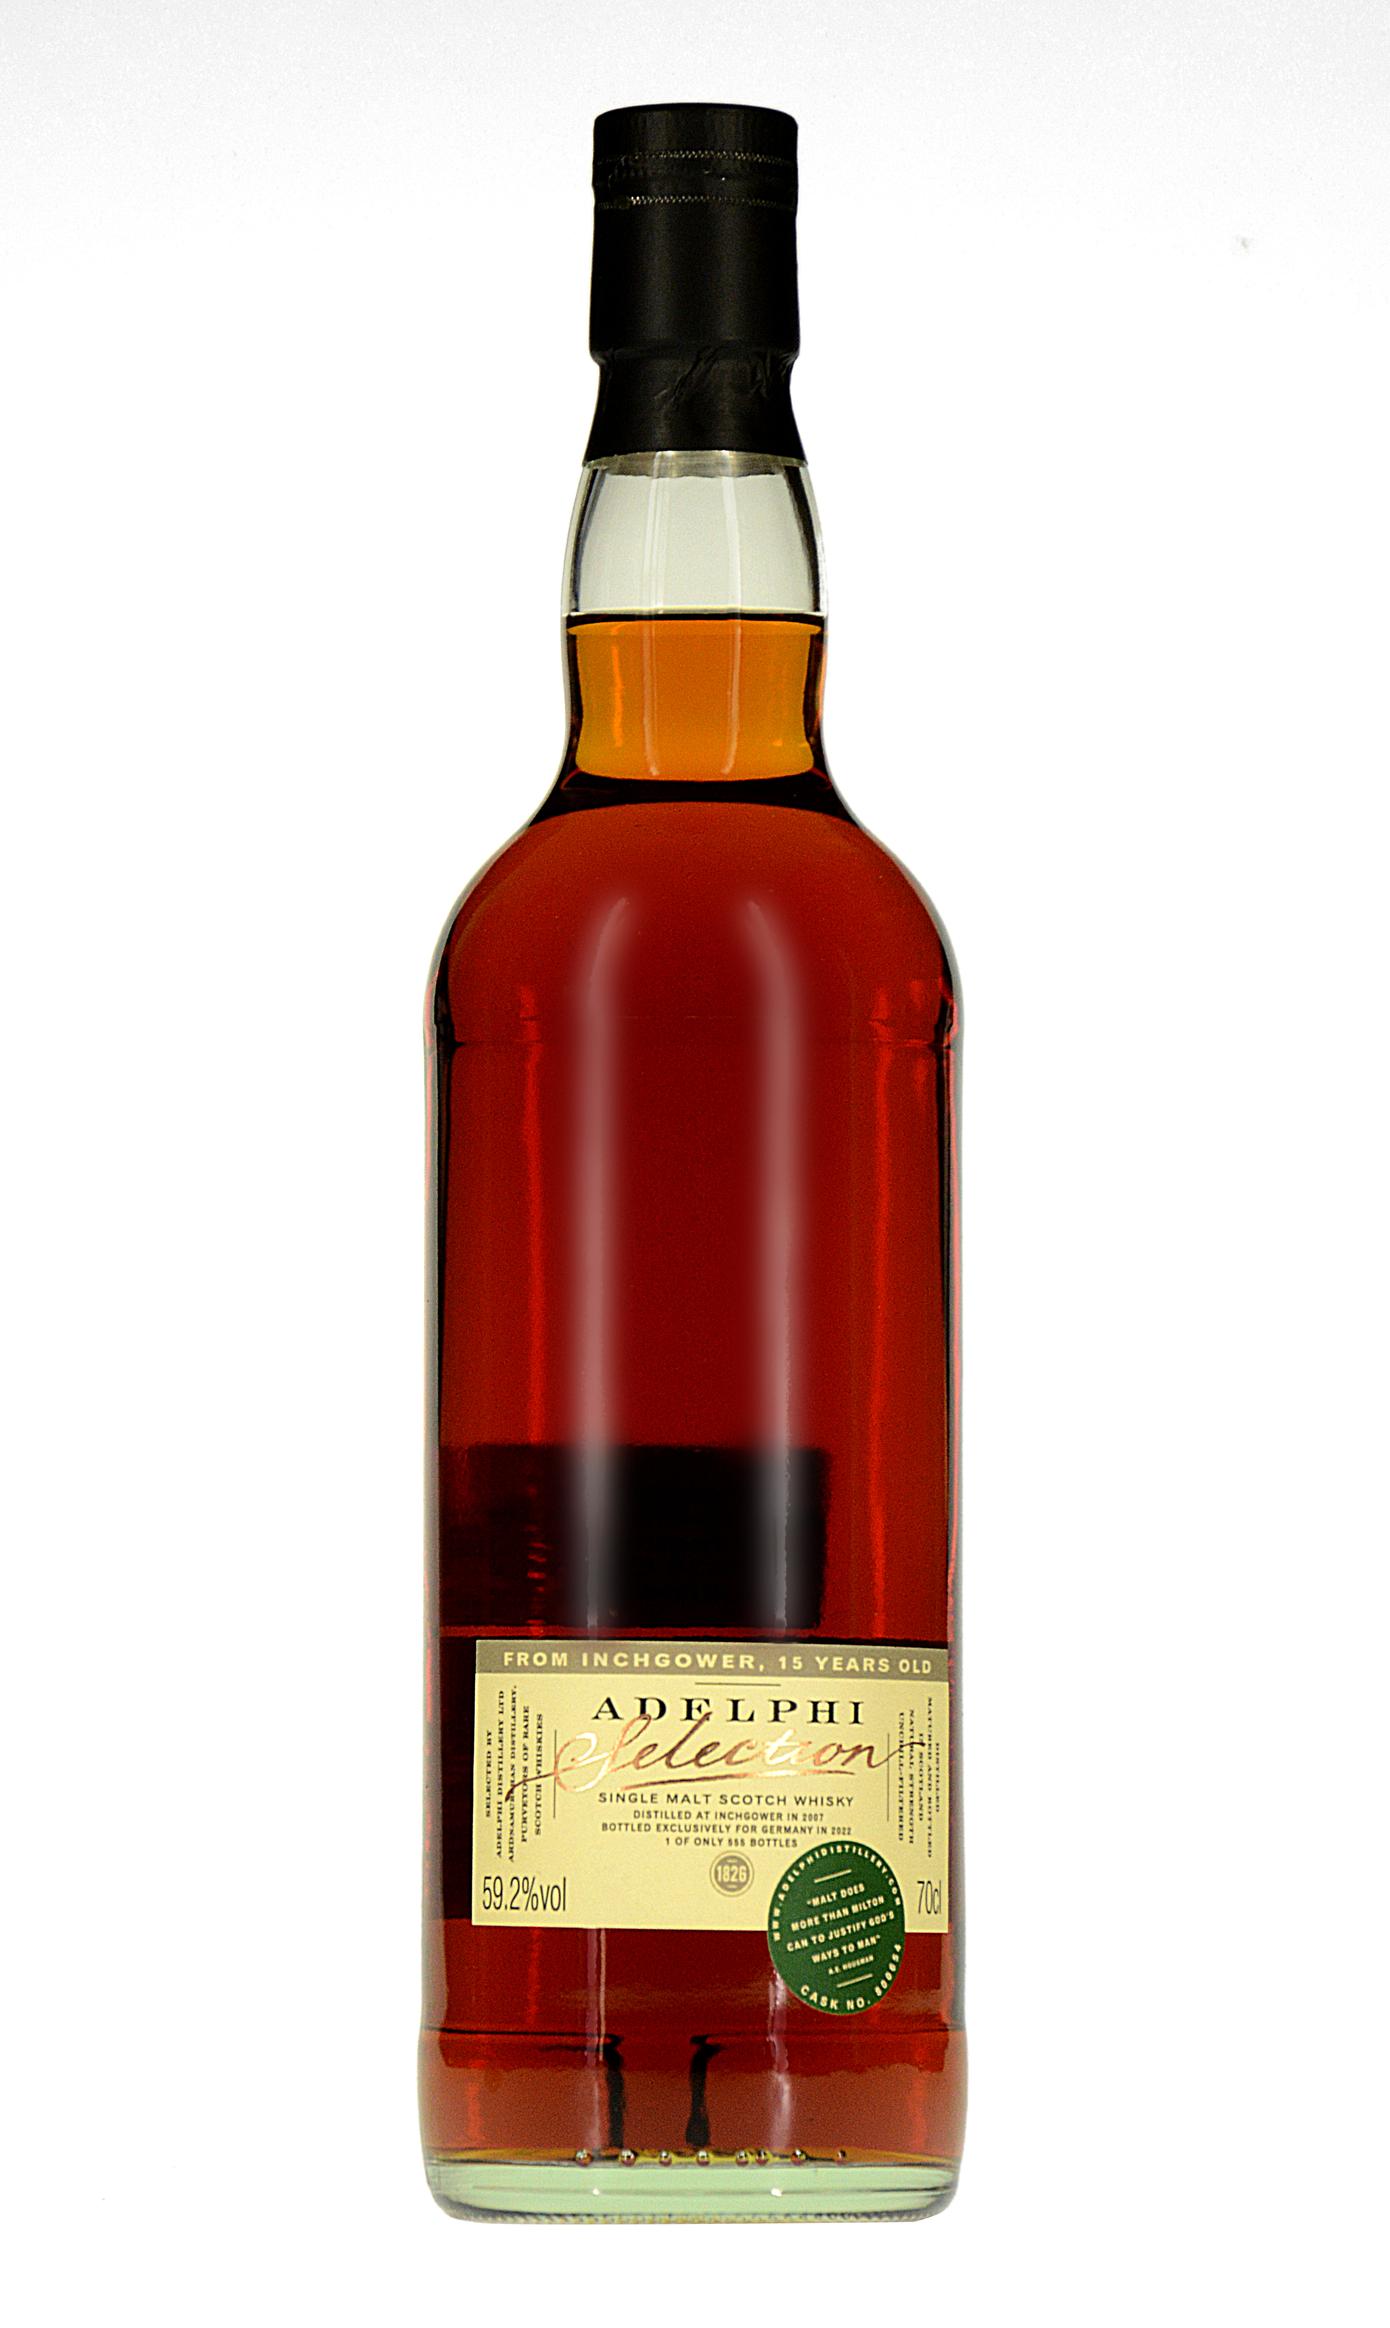 Inchgower 2007, 15 y.o. - First Fill Sherry Cask, 59,2% Alc.Vol., Fass Nr. 300654, Adelphi